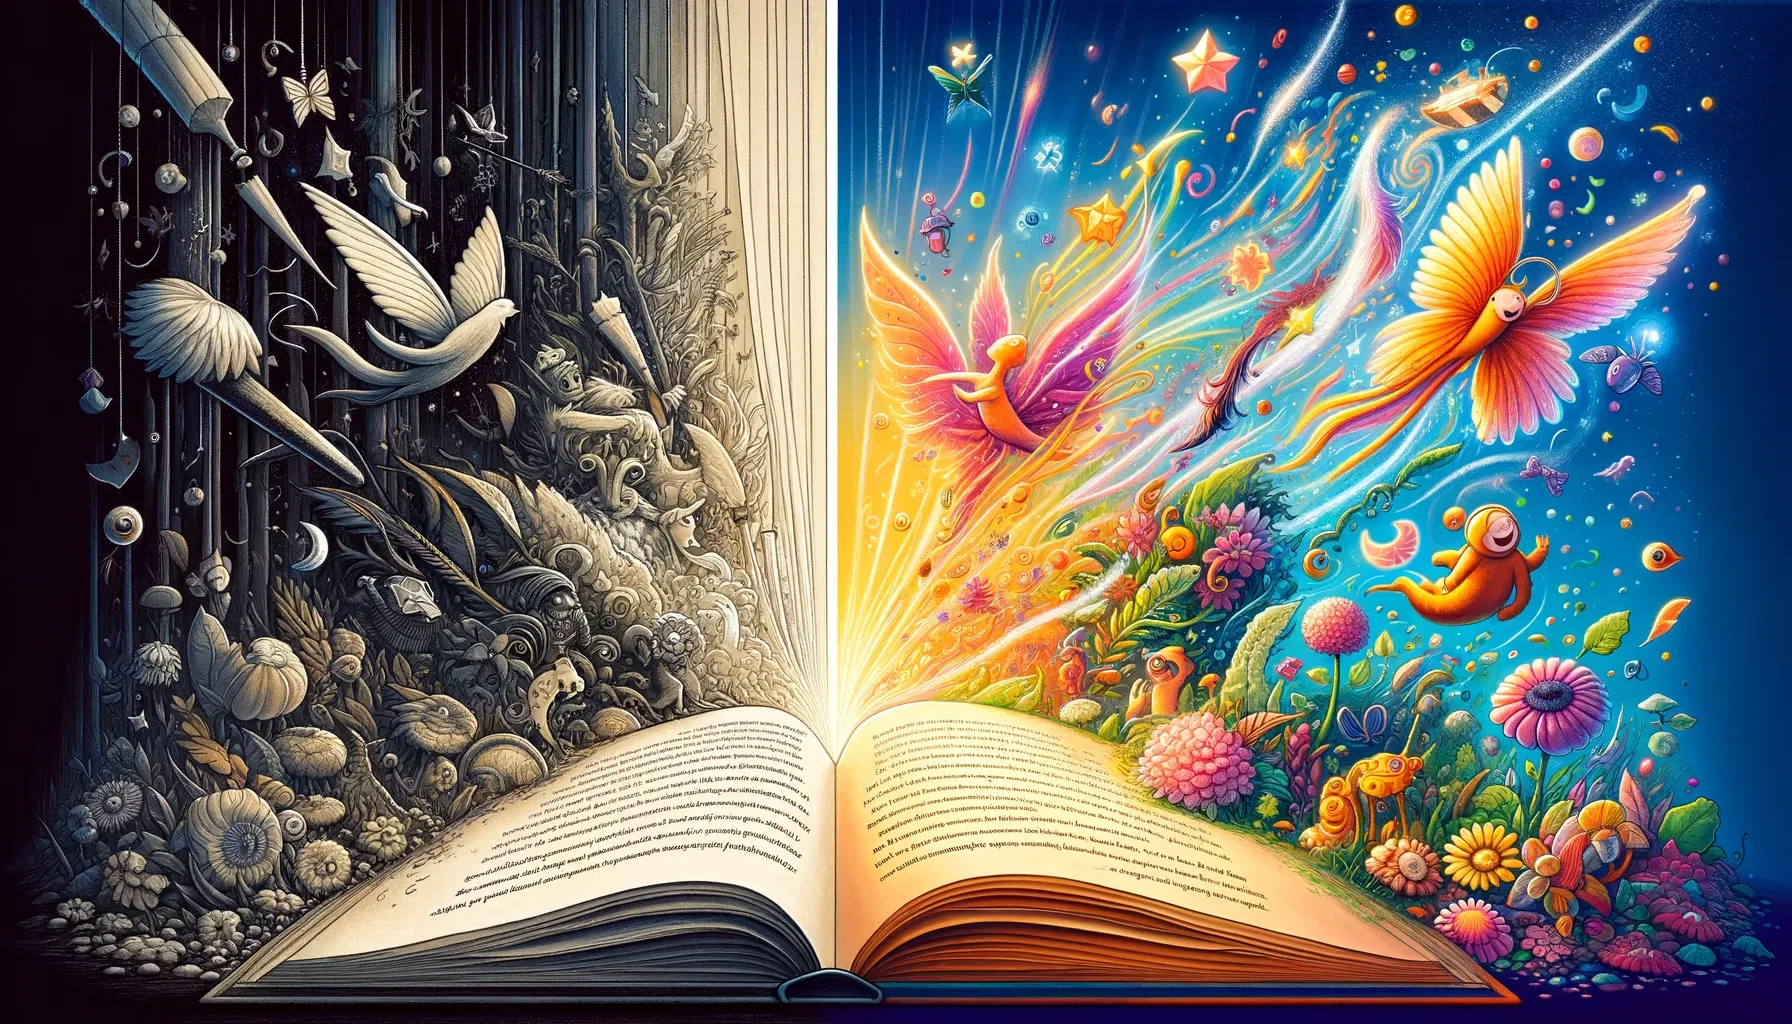 Before-and-after comparison of a book page, transitioning from plain text to vibrant illustrations, showcasing the transformative power of visuals in children's literature.